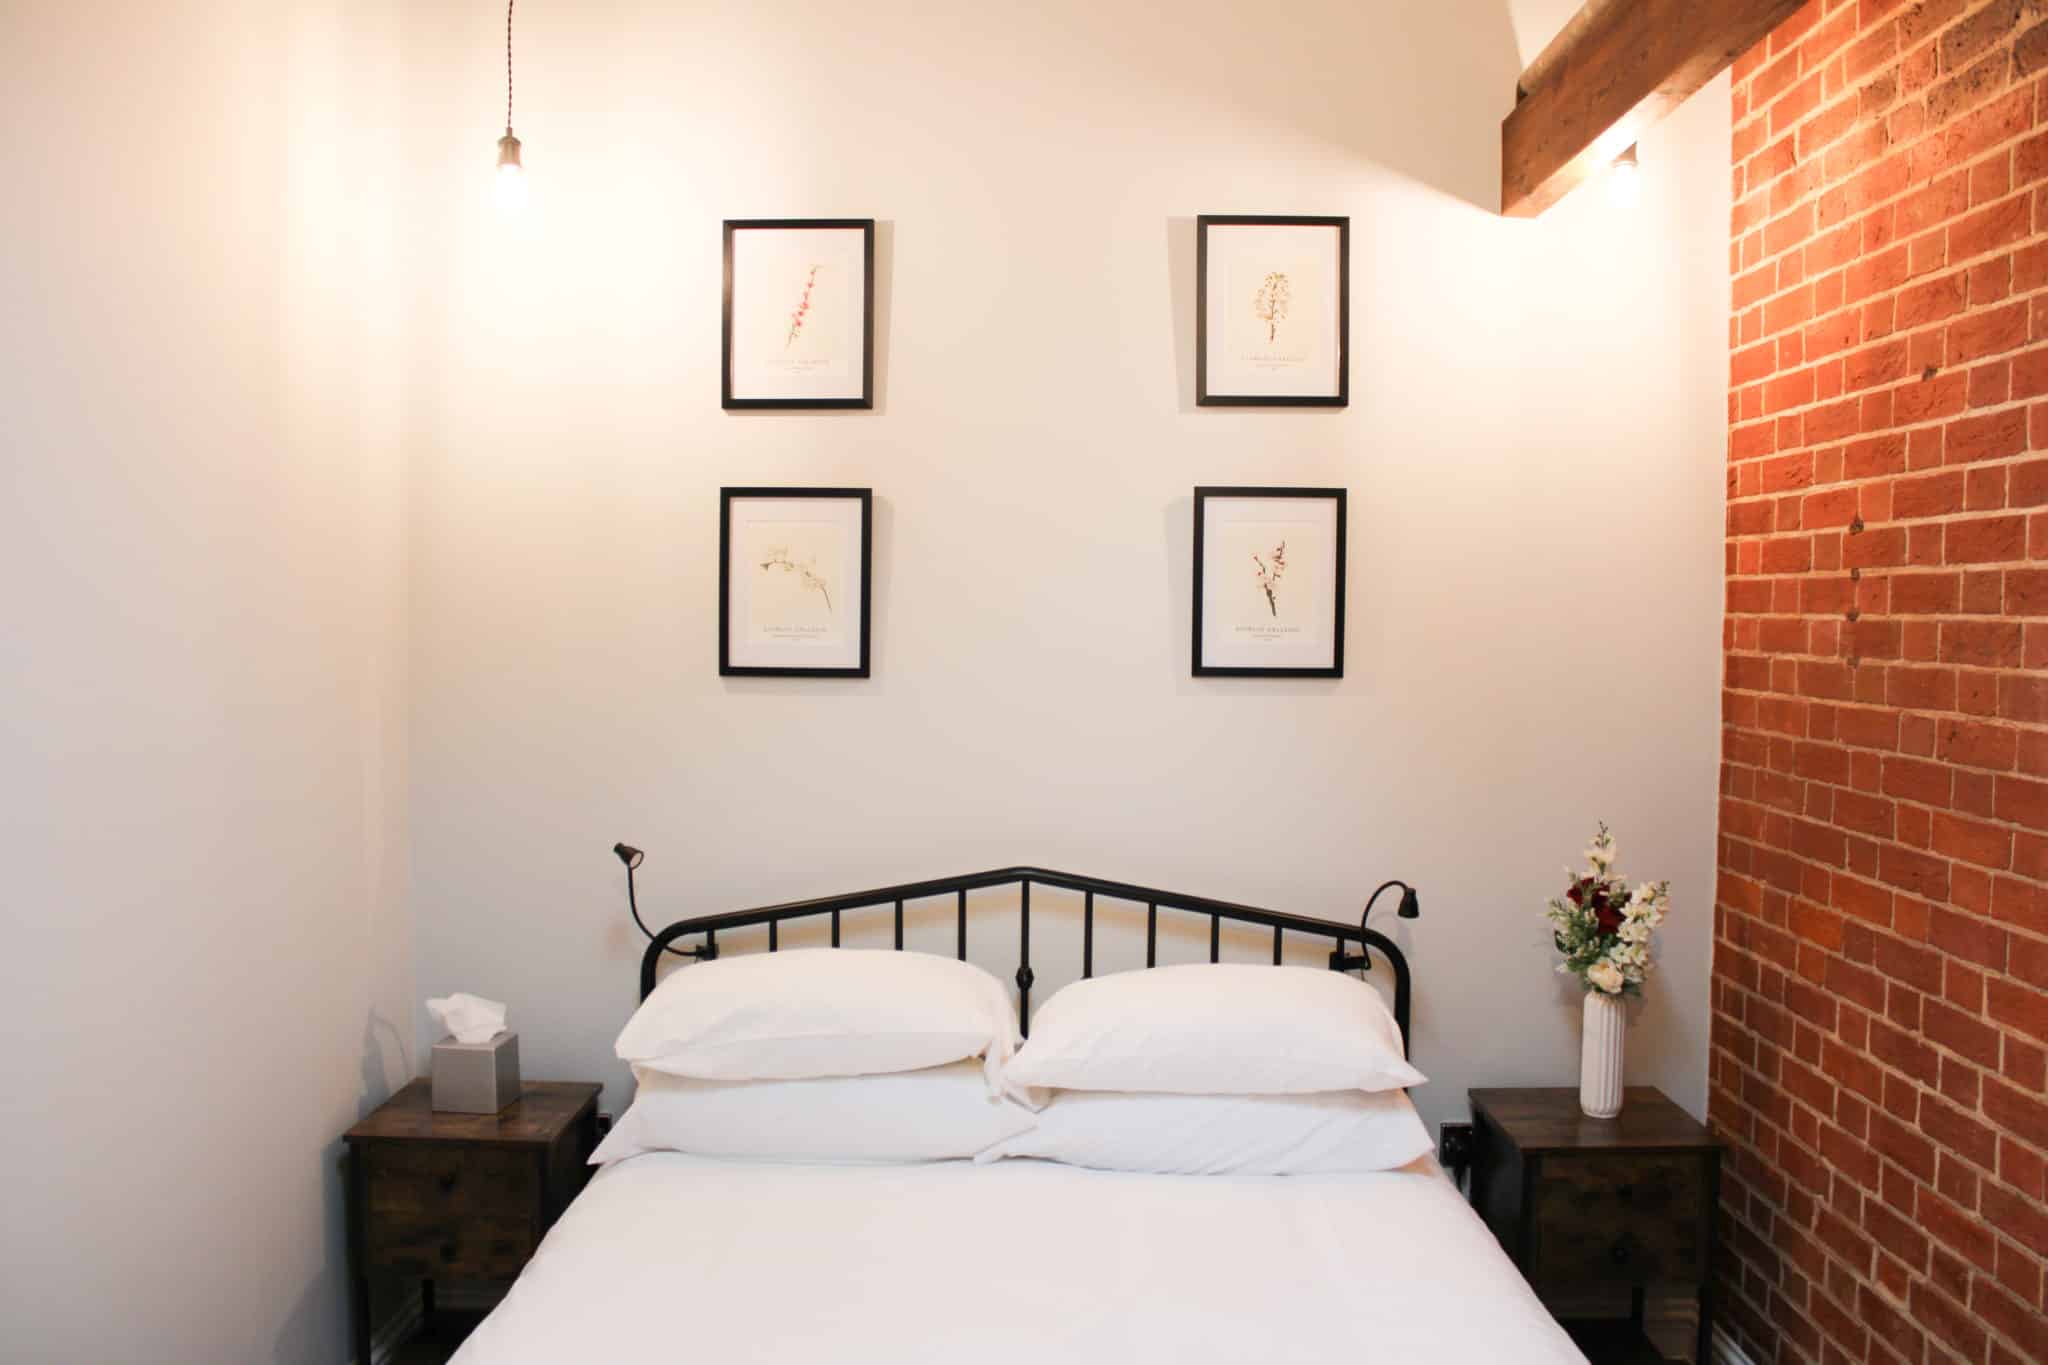 neatly furnished bedroom with a brick wall and wooden beam aesthetic